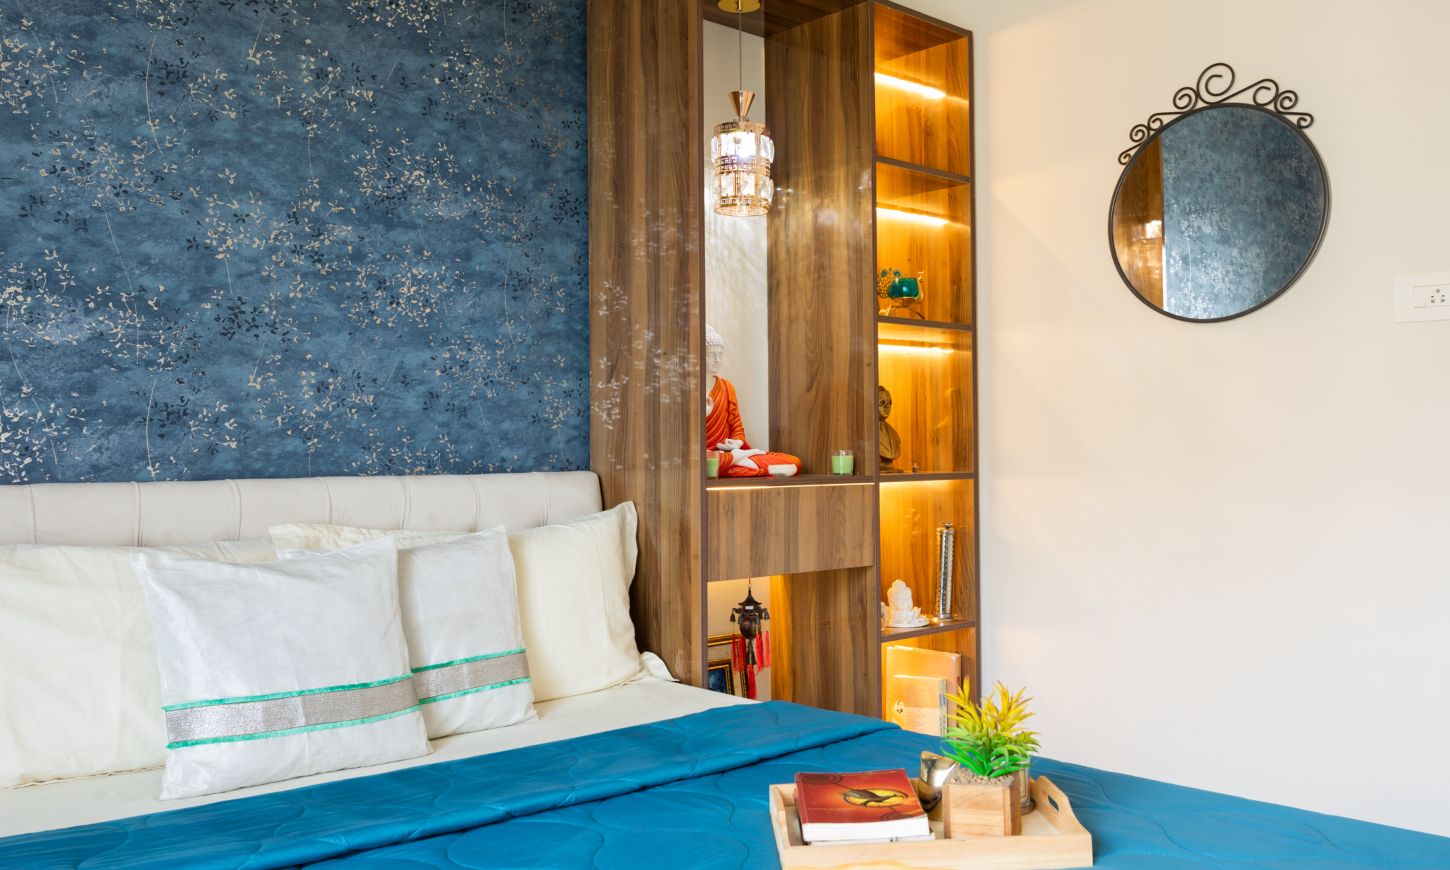 Designcafe designed the master bedroom in Rustomjee Urbania Azziano's 2 bhk apartment in Thane with a bookshelf